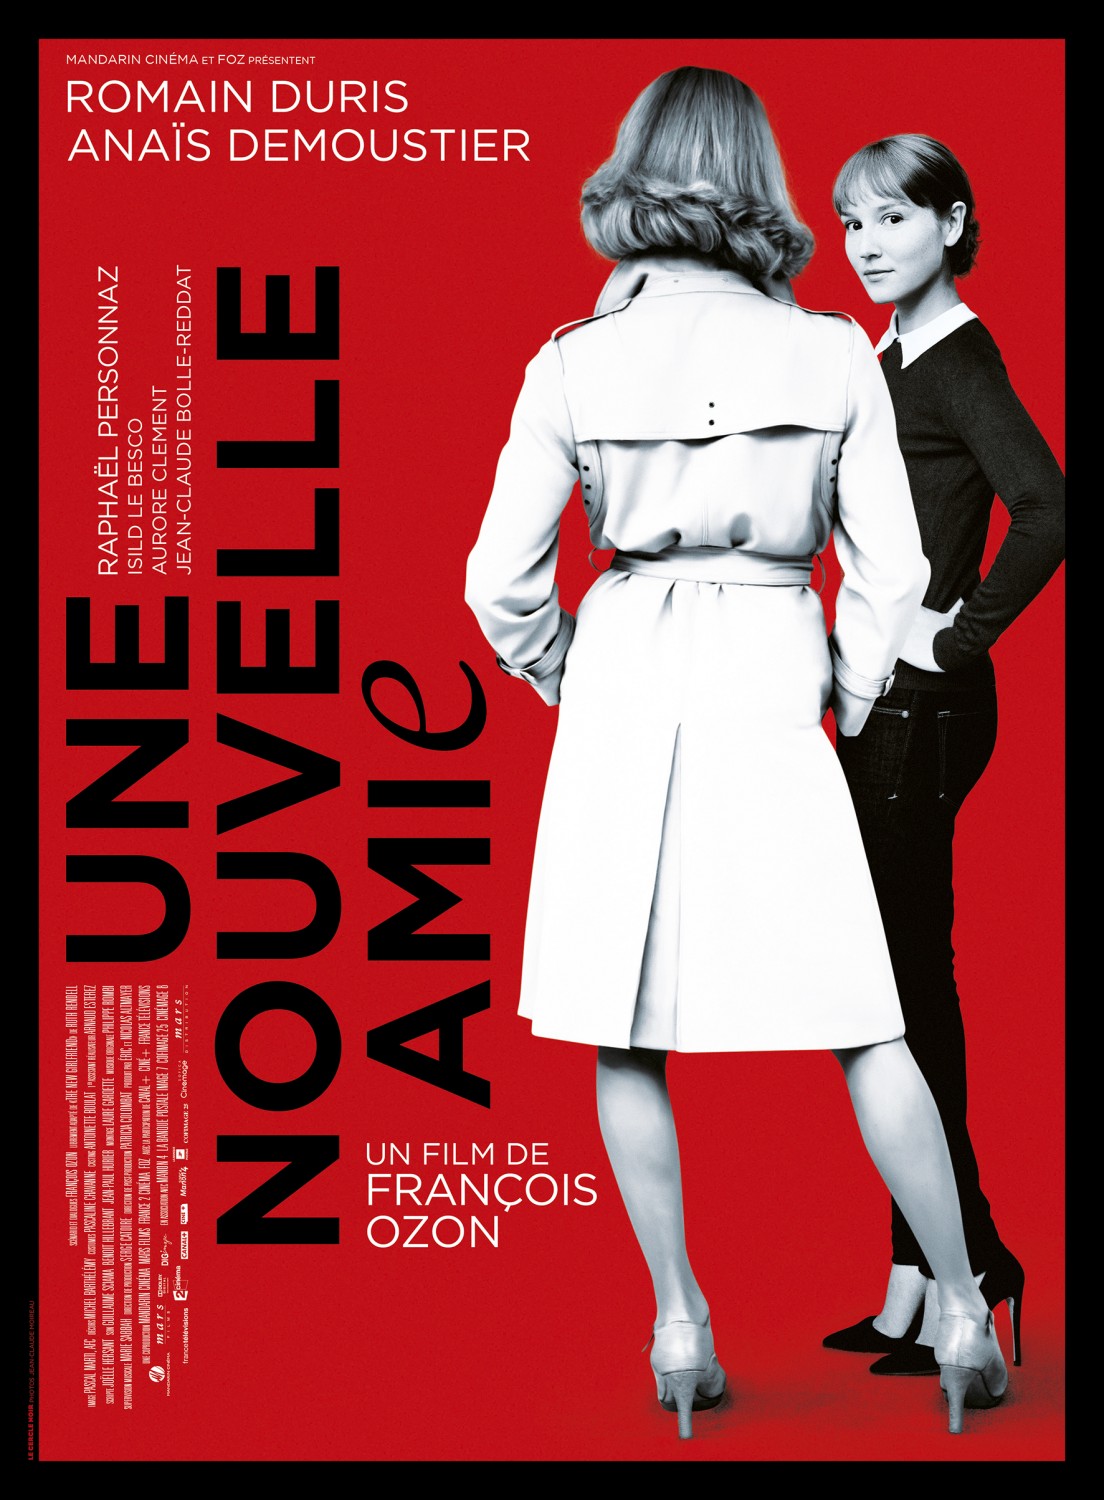 Extra Large Movie Poster Image for Une nouvelle amie (#1 of 4)